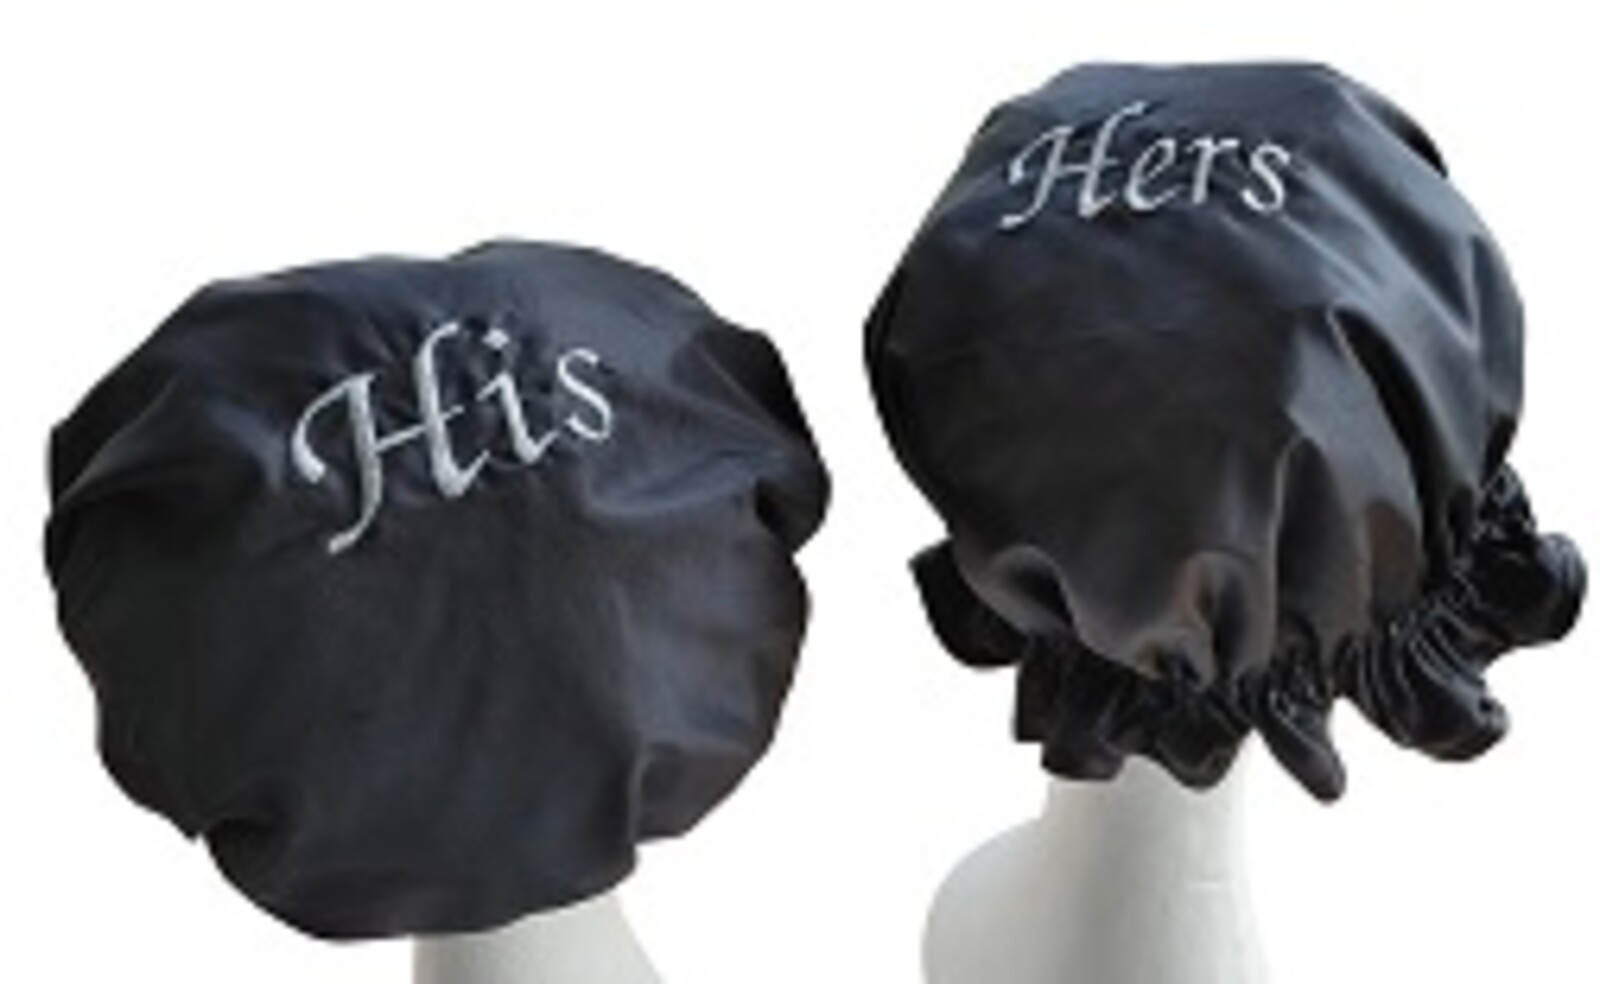 His 'n' Hers - Black Embroidered